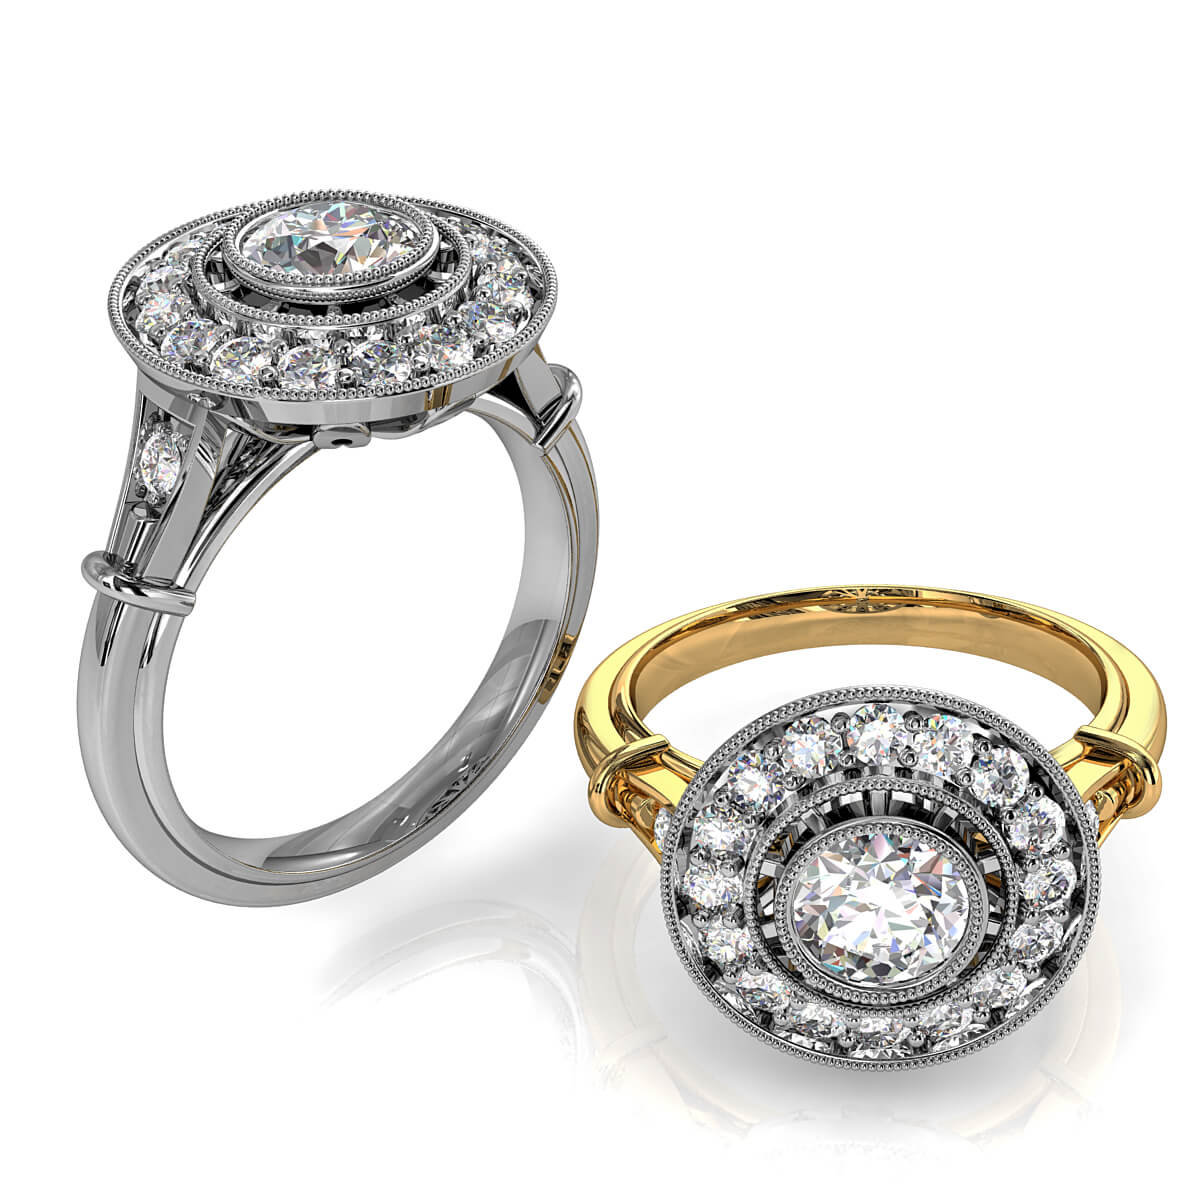 Round Brilliant Cut Diamond Halo Engagement Ring, Bezel Set in a Seperate Bead Set Halo on an Art Deco Band.